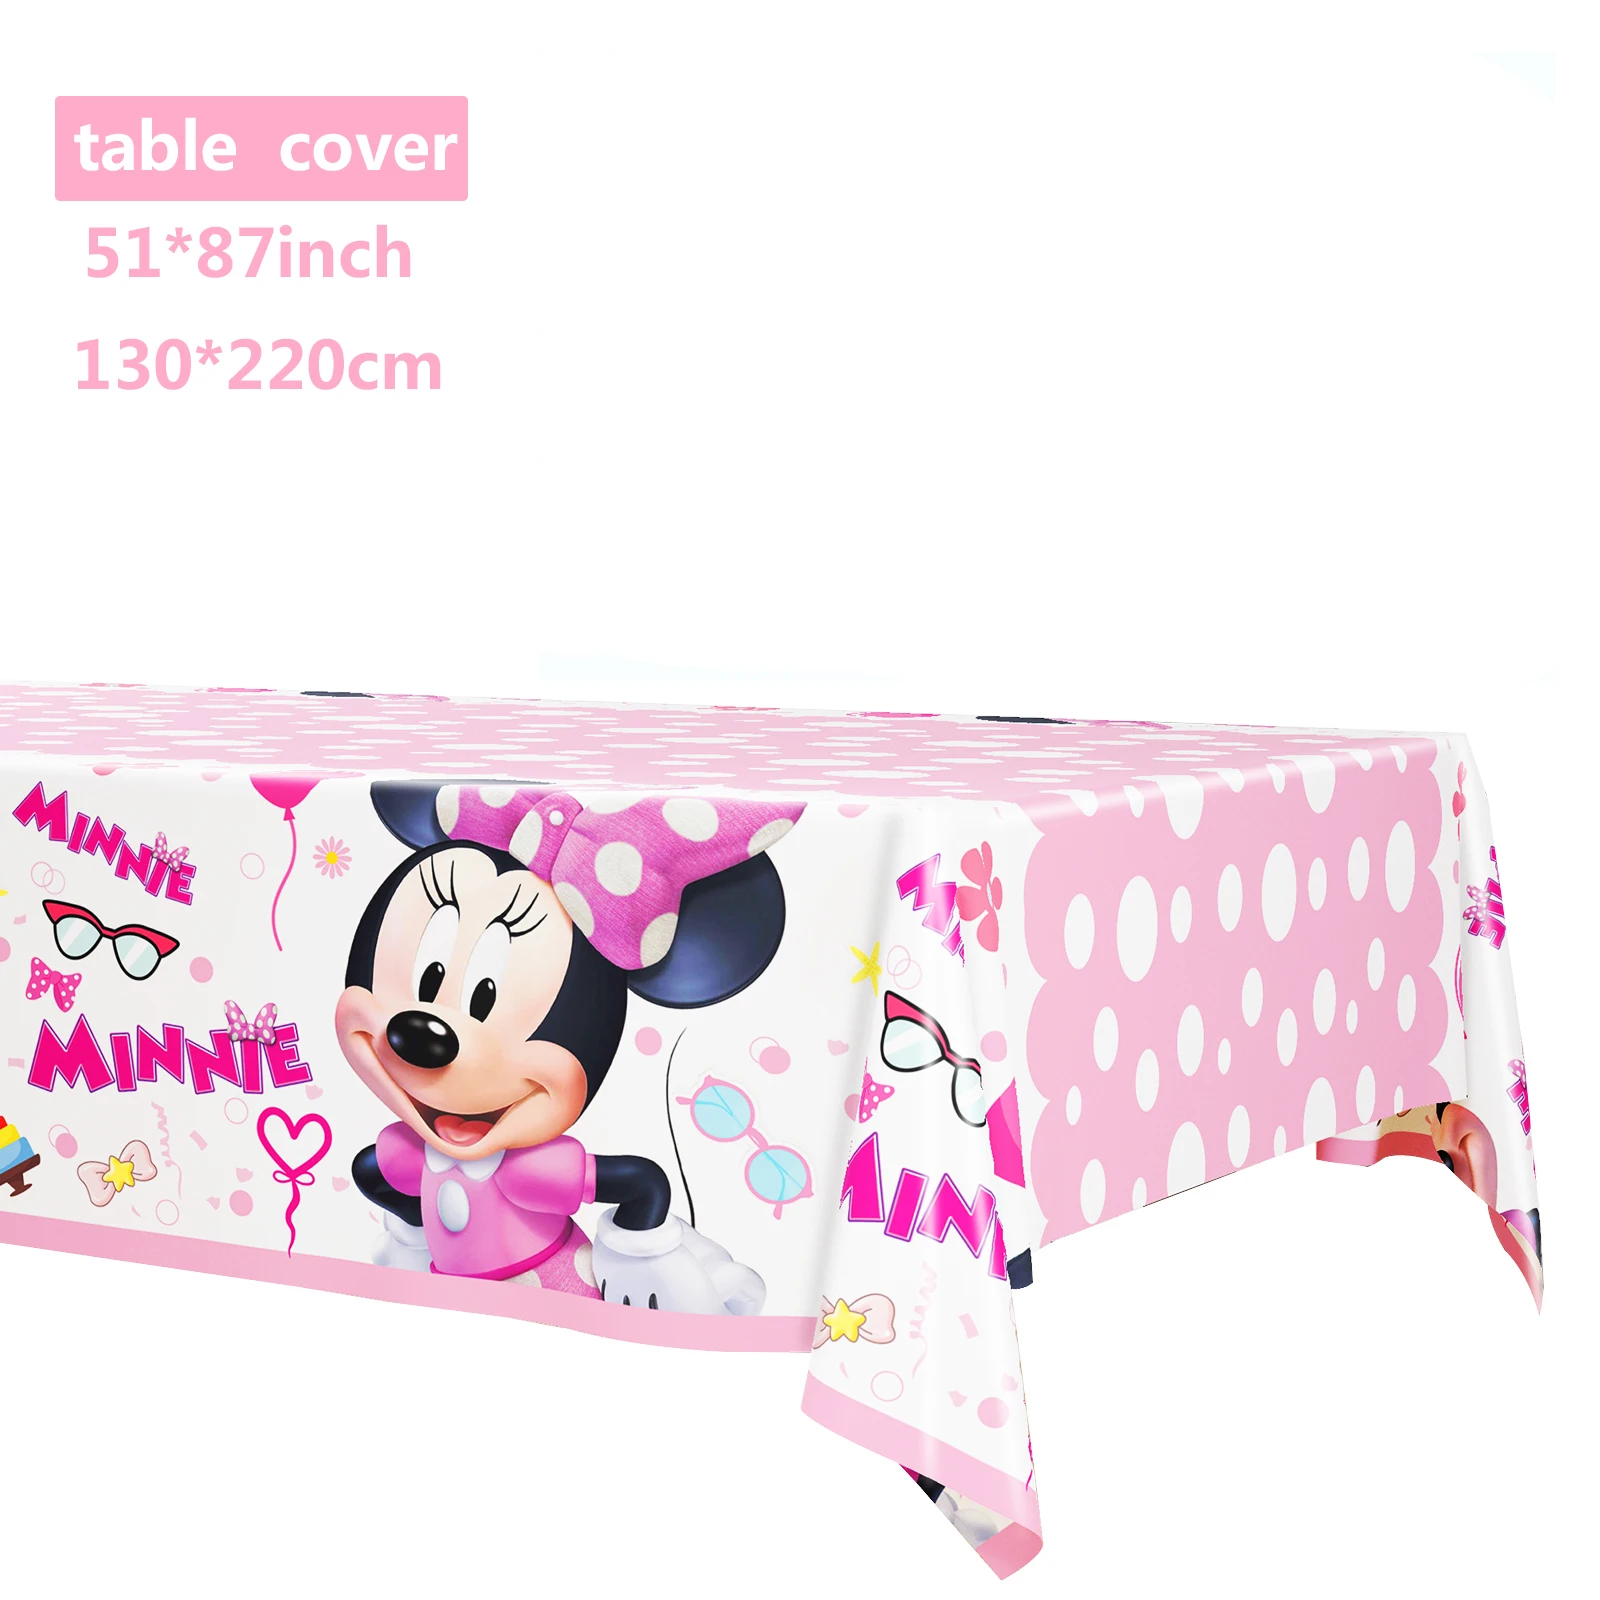  Amscan Shower with Love Baby Girl Table Decorating Kit